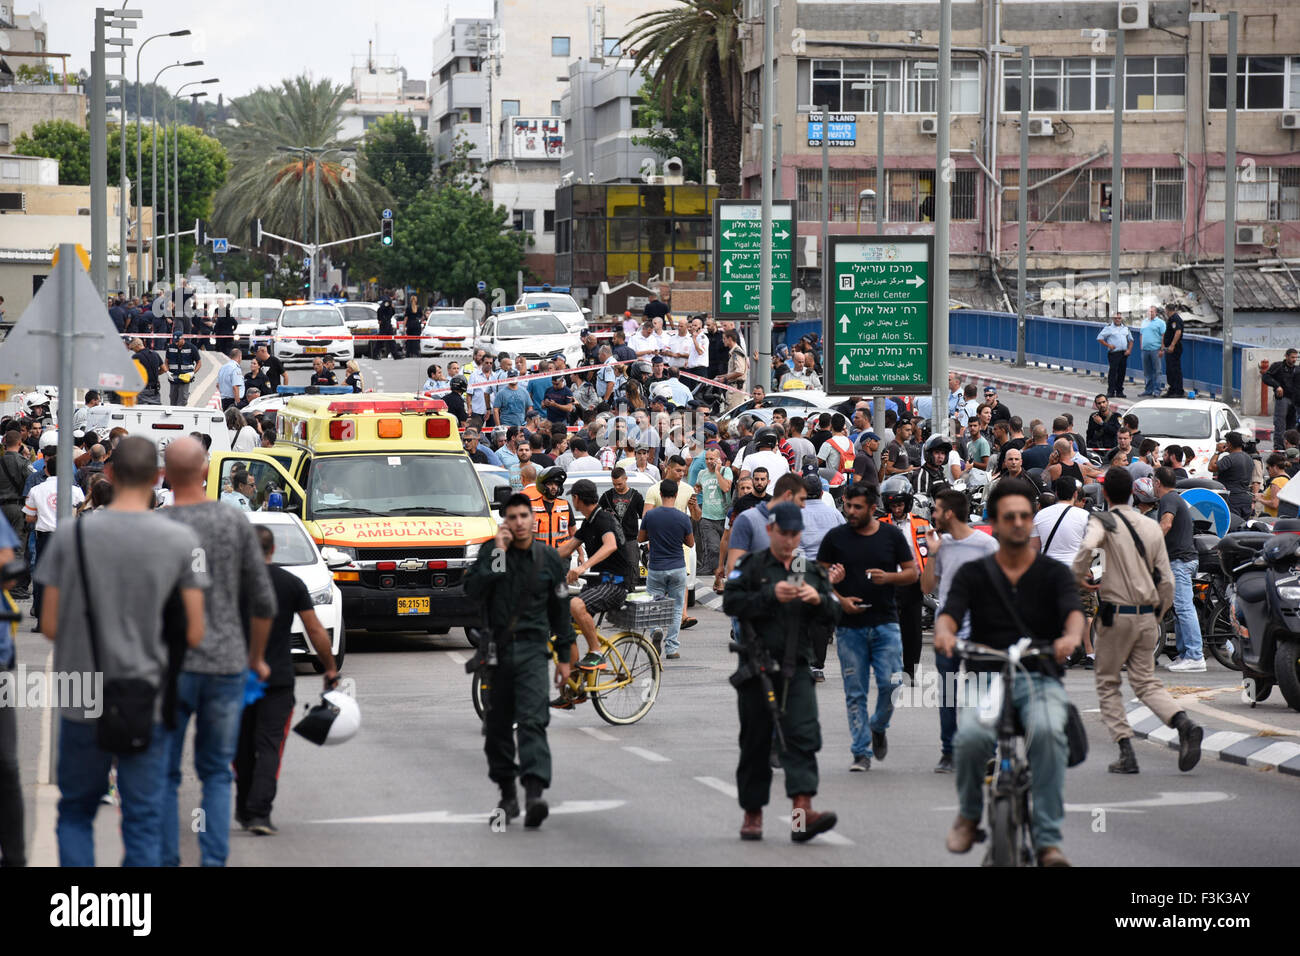 (151009) -- TEL AVIV, Oct. 9, 2015 (Xinhua) -- People watch the scene of an attack in Begin Street, central Tel Aviv, on Oct. 8, 2015. A Palestinian man was shot and killed on Thursday after stabbing two Israelis in Tel Aviv, as violence between Israelis and Palestinians spiraled, Israeli officials said. Police said the incident was a 'suspected terror attack,' and the assailant was 'neutralized.' A police spokesperson later added that the assailant stabbed a female soldier with a screwdriver in Begin Street, near the Defense Ministry and IDF headquarters complex. He then stabbed another perso Stock Photo